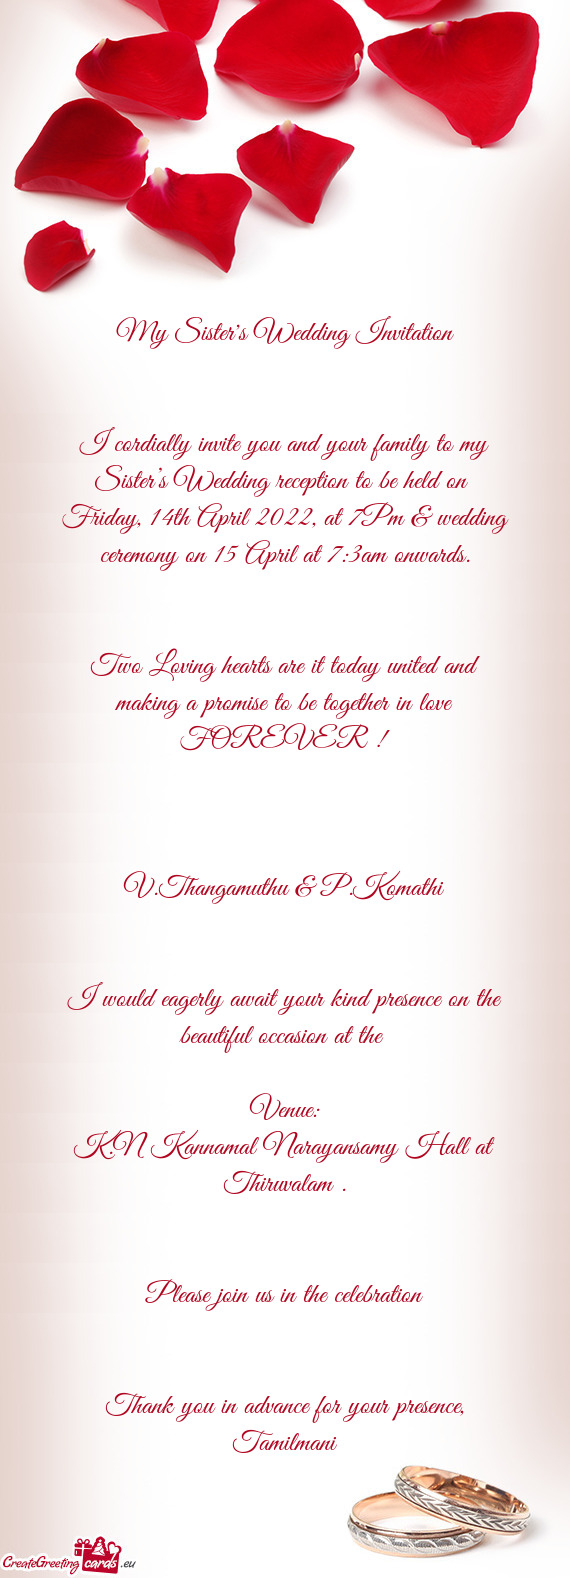 Friday, 14th April 2022, at 7Pm & wedding ceremony on 15 April at 7:3am onwards